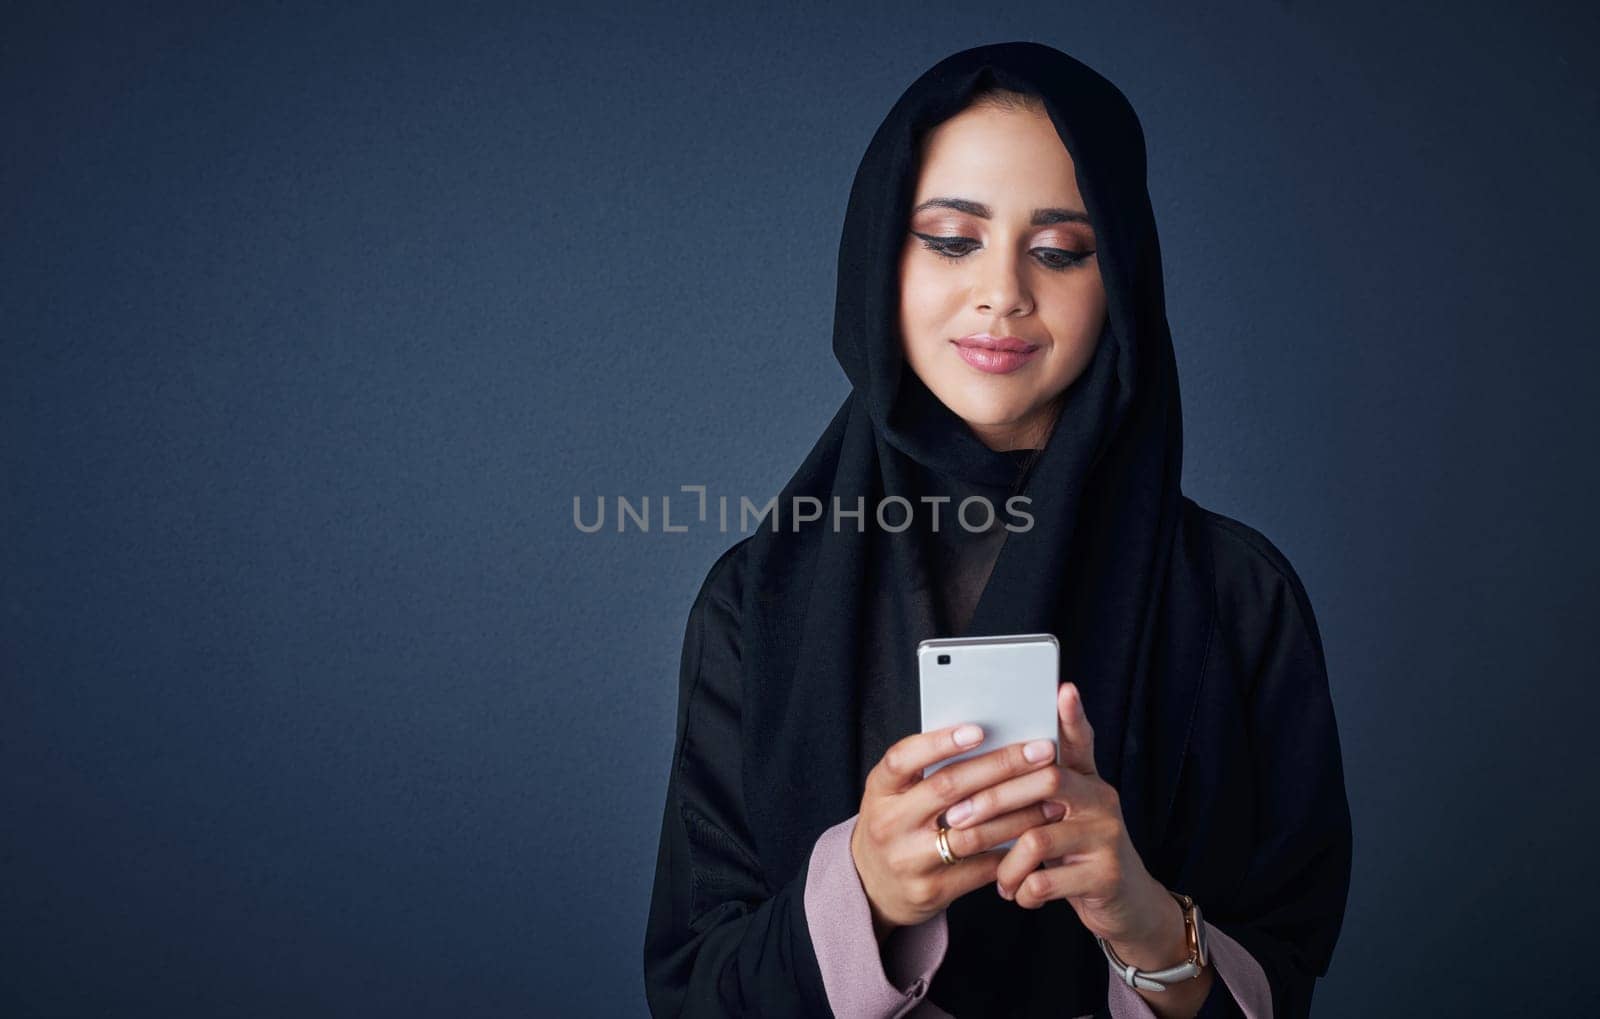 Keeping her lifestyle mobile. Studio shot of a young woman wearing a burqa and using a mobile phone against a gray background